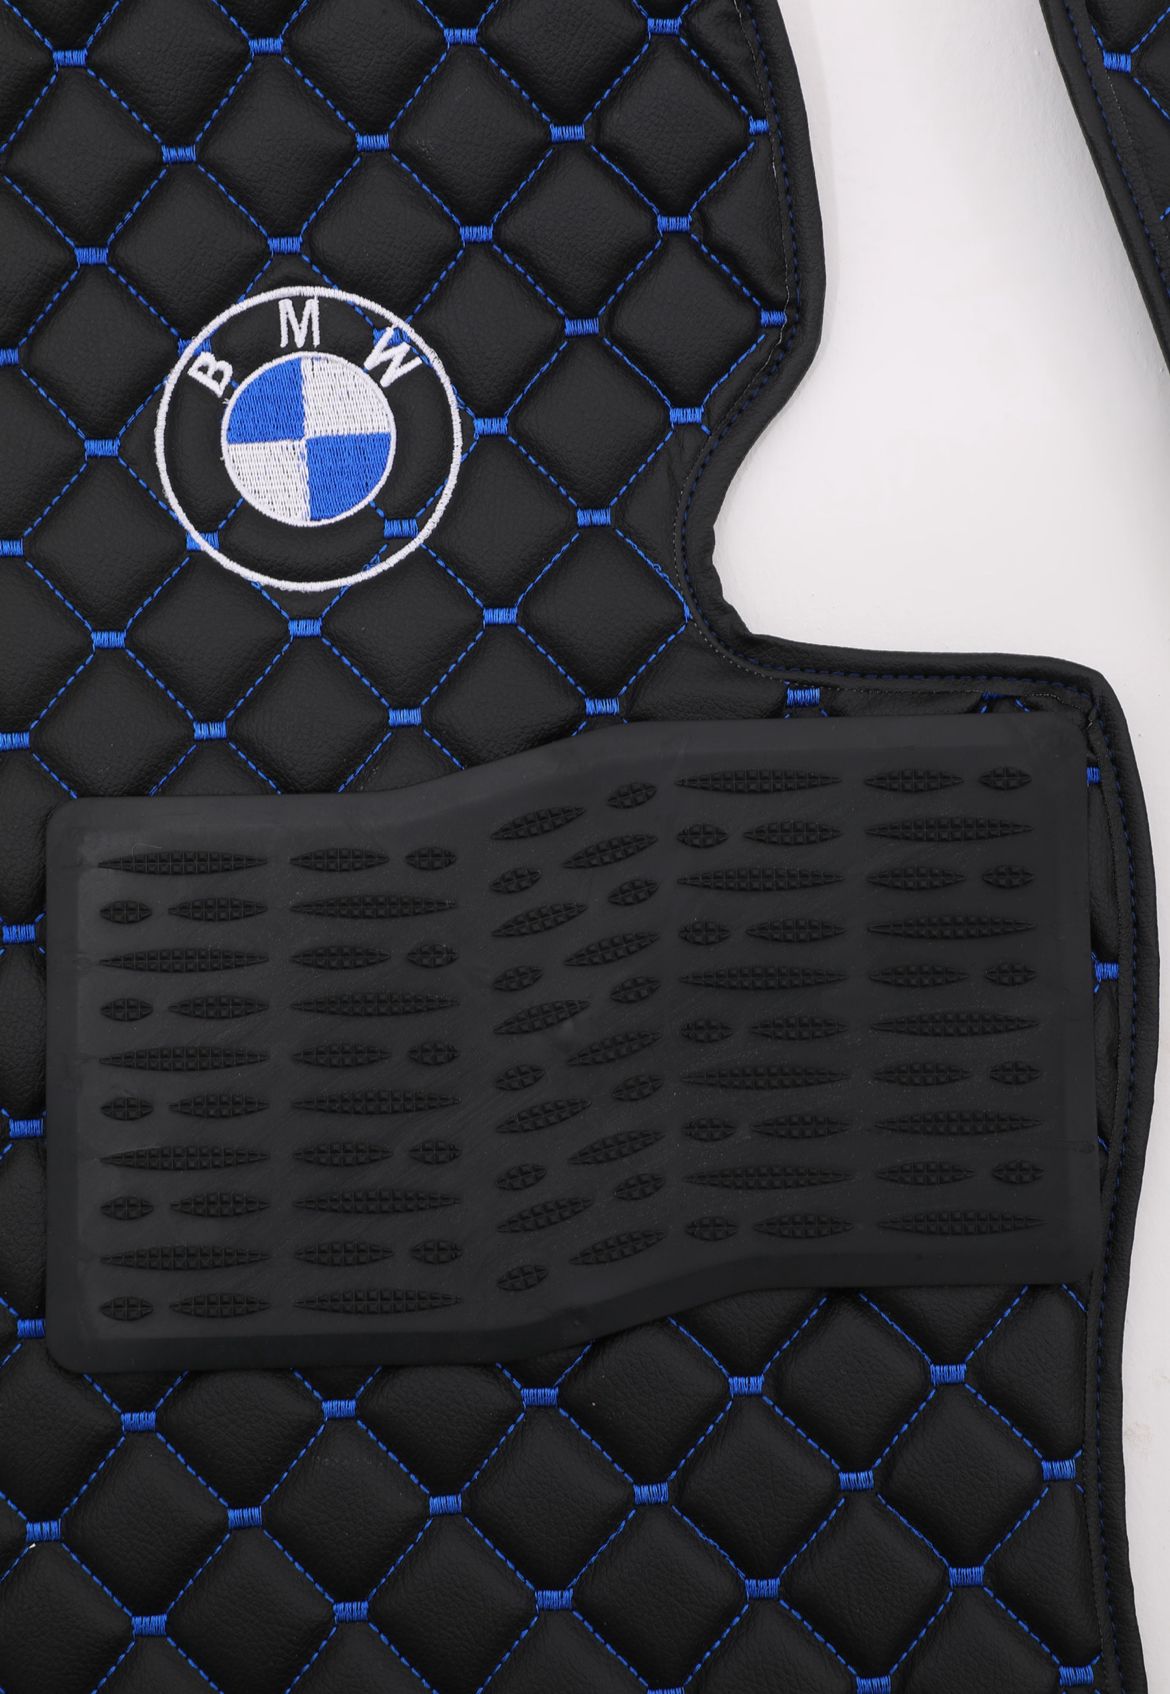 For all BMW M PERFORMANCE Luxury Leather Custom Car Mat 4x